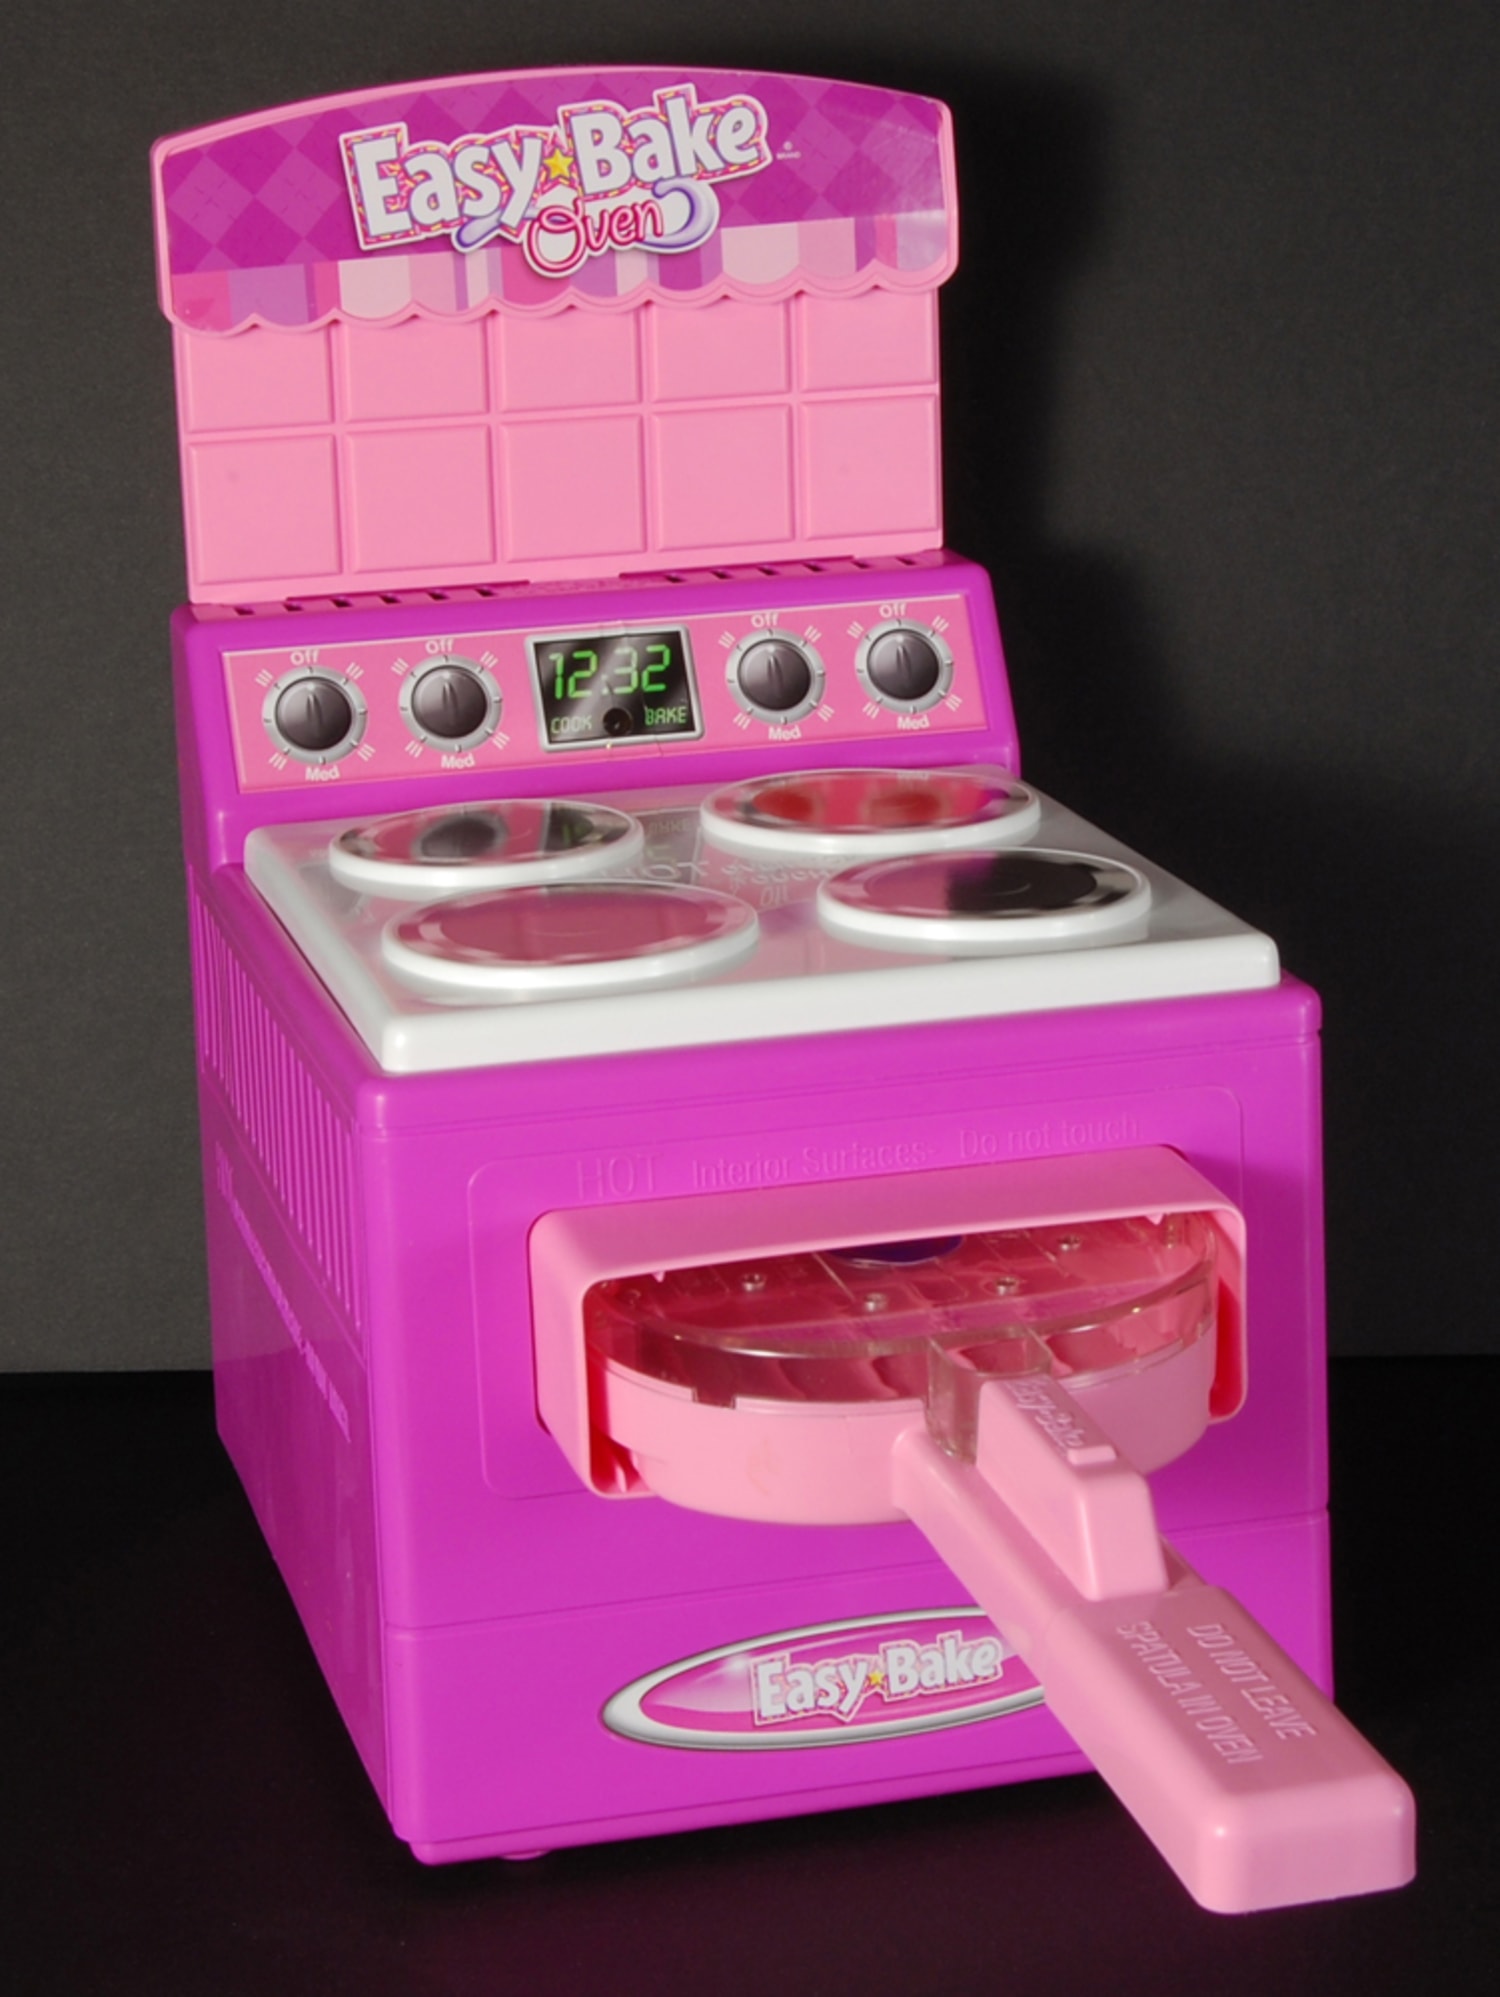 A bizarre toy oven that appears to turn dough into freshly baked